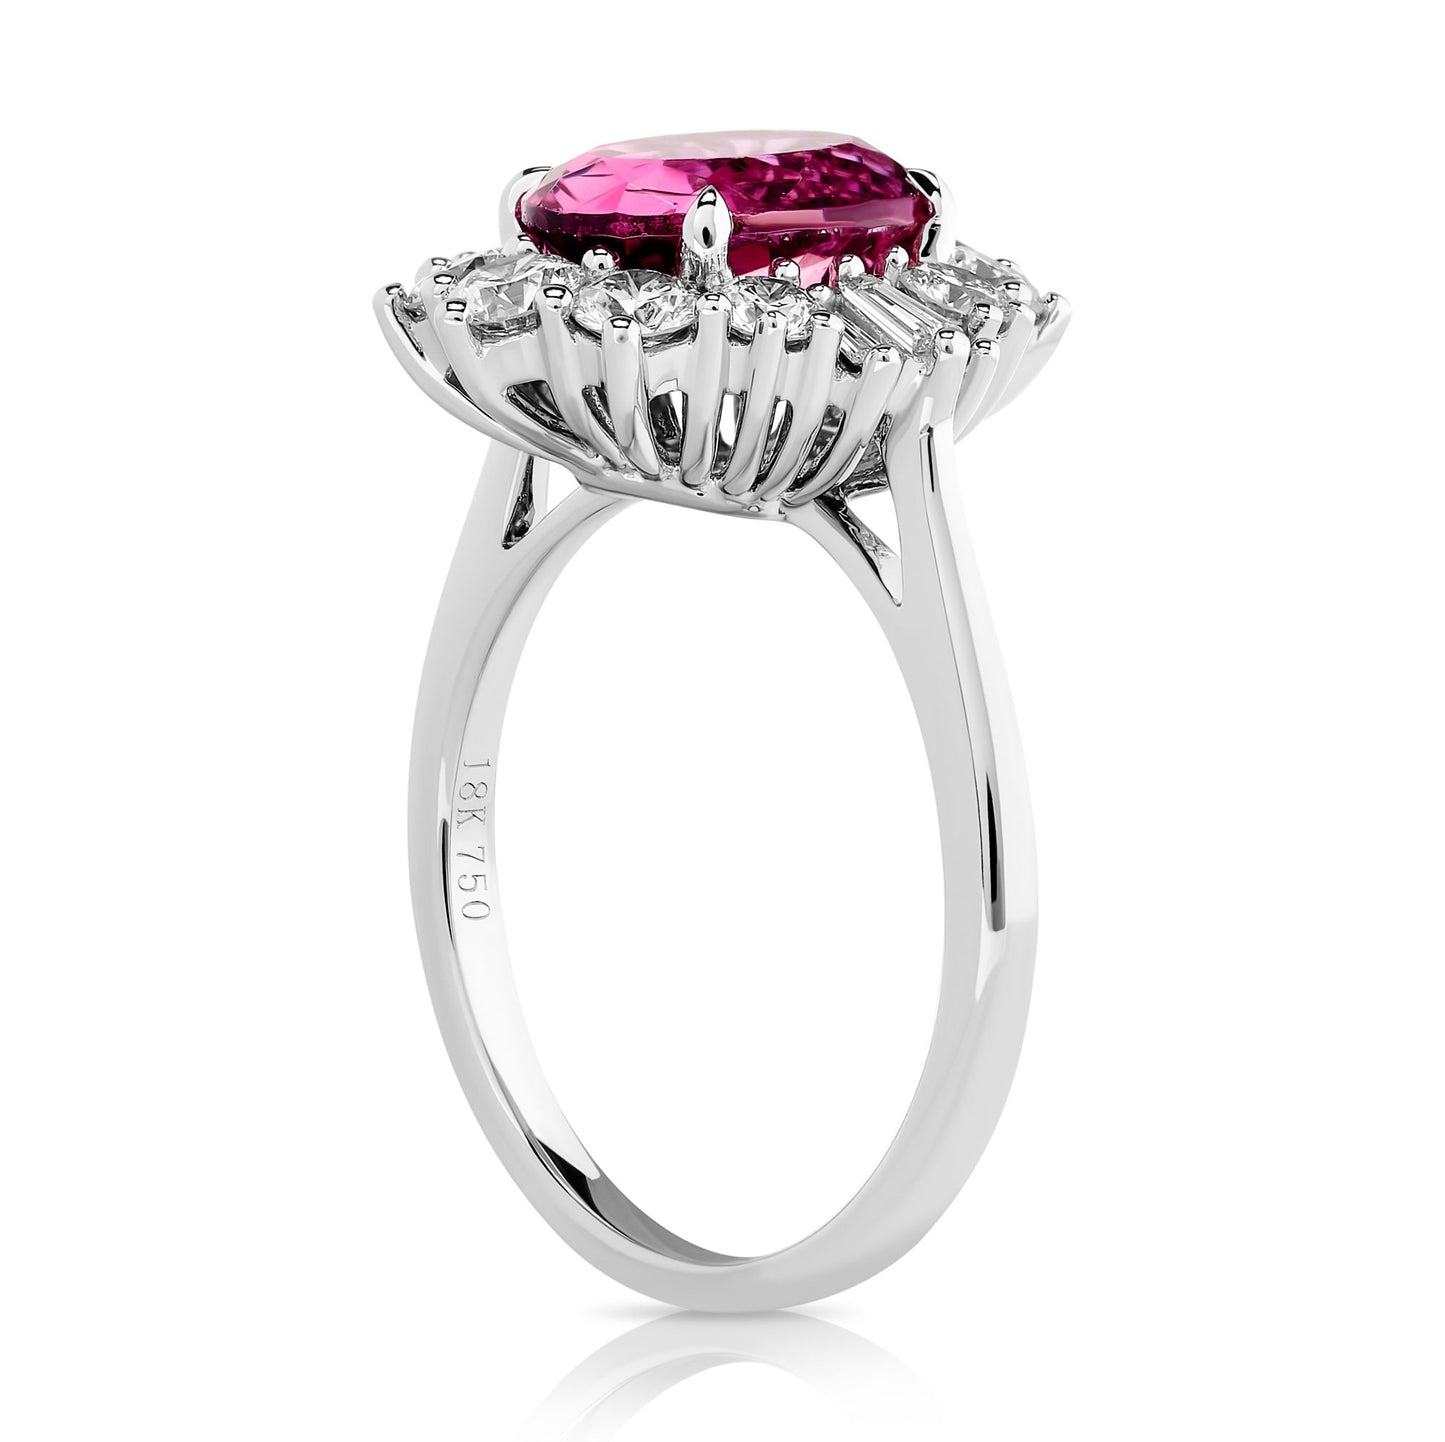 In Bloom Tourmaline and Diamond Ring